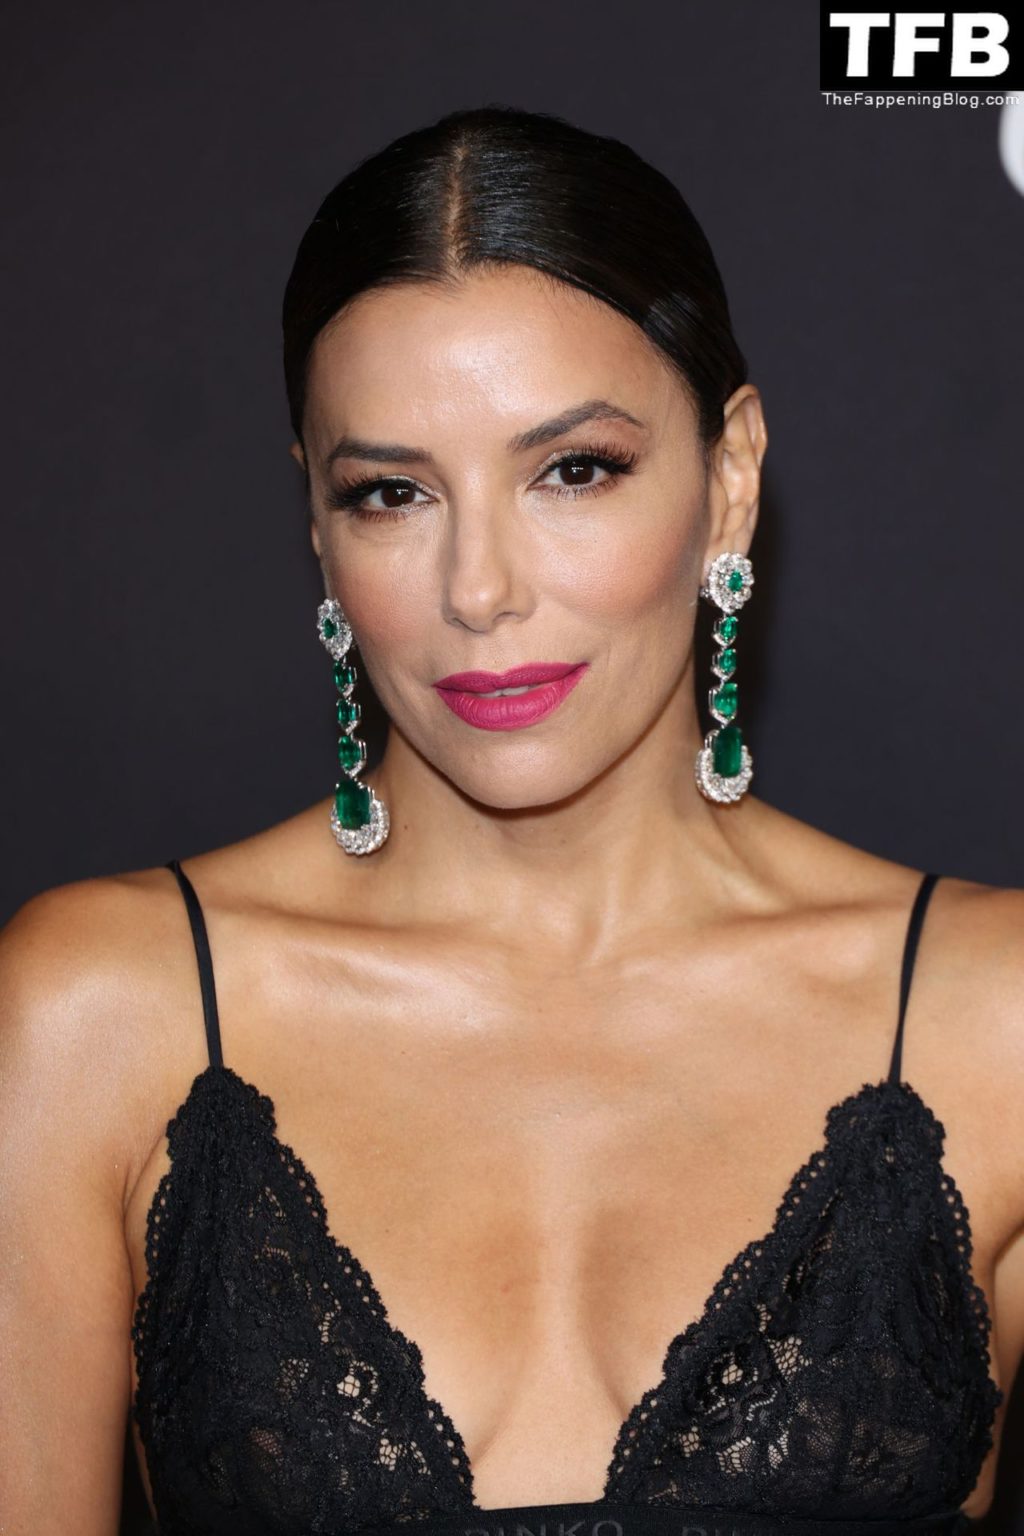 Eva Longoria Sexy The Fappening Blog 9 4 1024x1536 - Eva Longoria Shows Off Her Sexy Tits & Legs at the Chopard Loves Cinema Dinner Gala Night in Cannes (47 Photos)